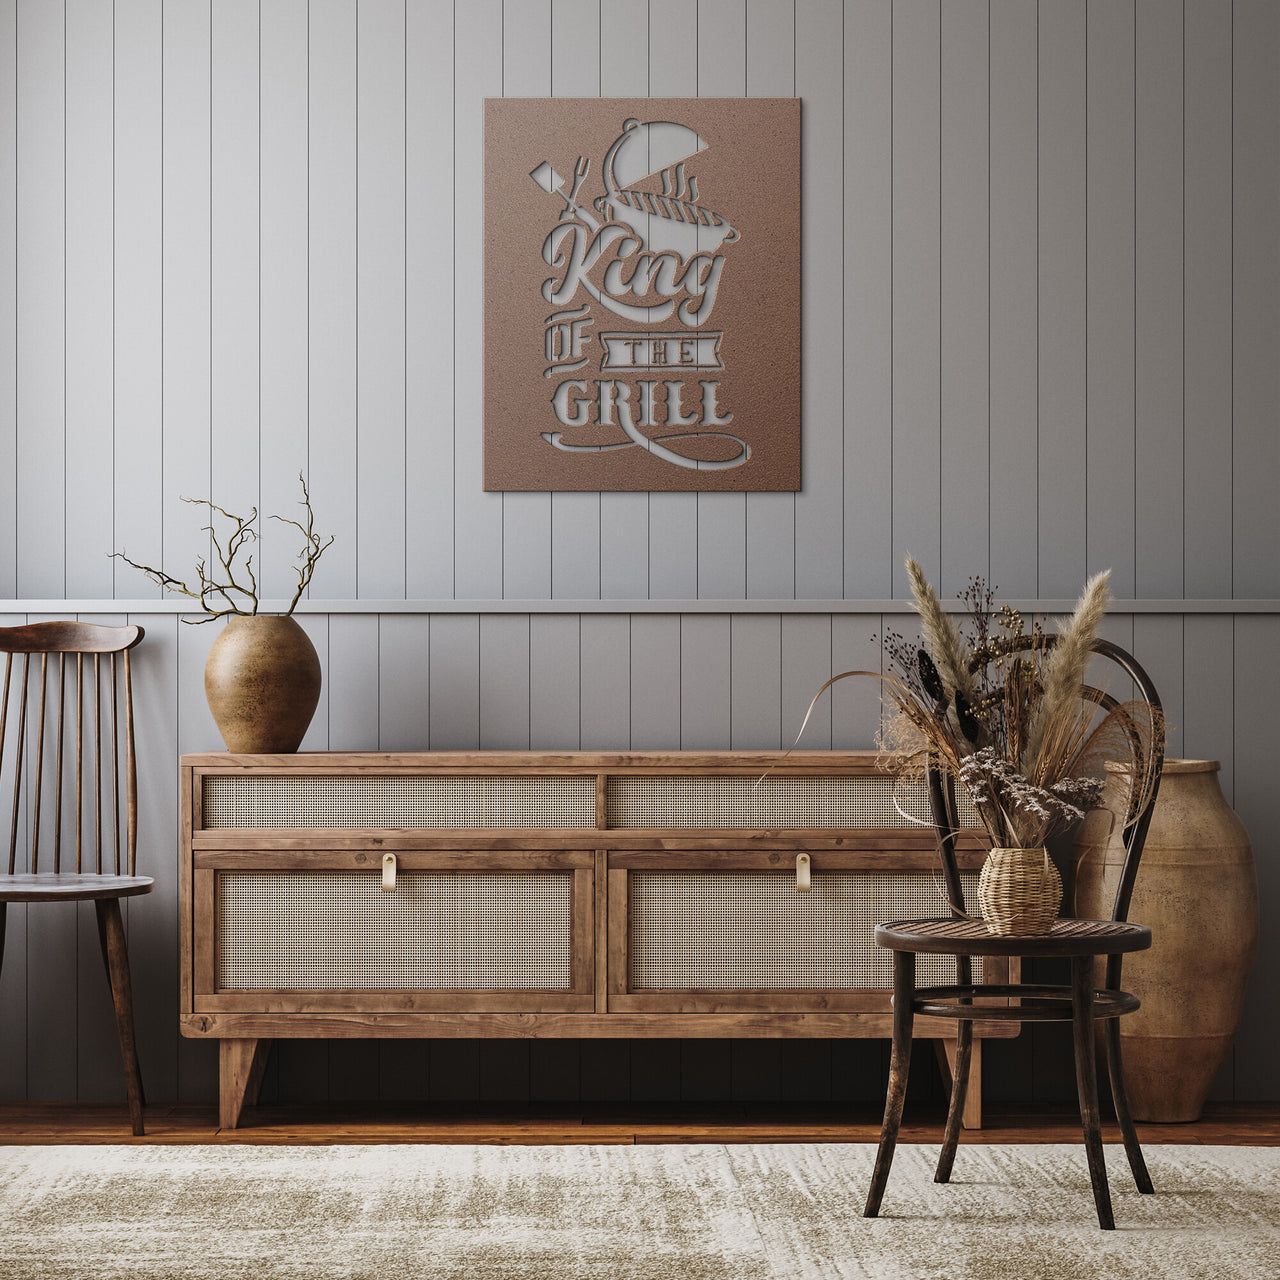 King of the grill, grill and text design on wall 